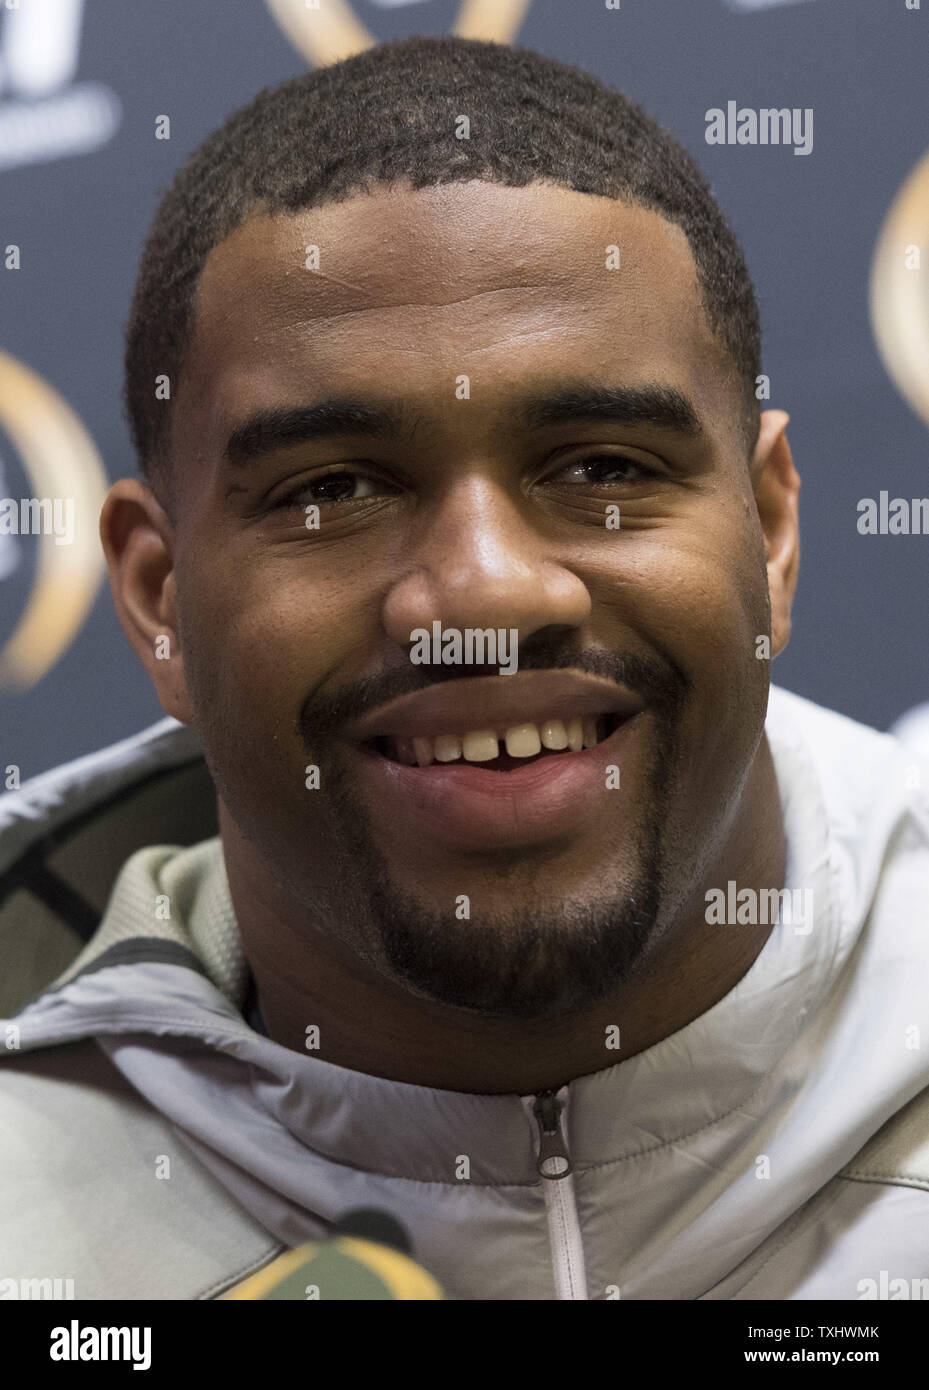 Alabama Crimson Tide Defensive Lineman Jonathan Allen talks to reporters on media day prior to the NCAA Football National Championship, in Tampa, Florida on January 7, 2017. Alabama will take on the Clemson Tigers in the College Football National Championship on Monday. Photo by Kevin Dietsch/UPI Stock Photo